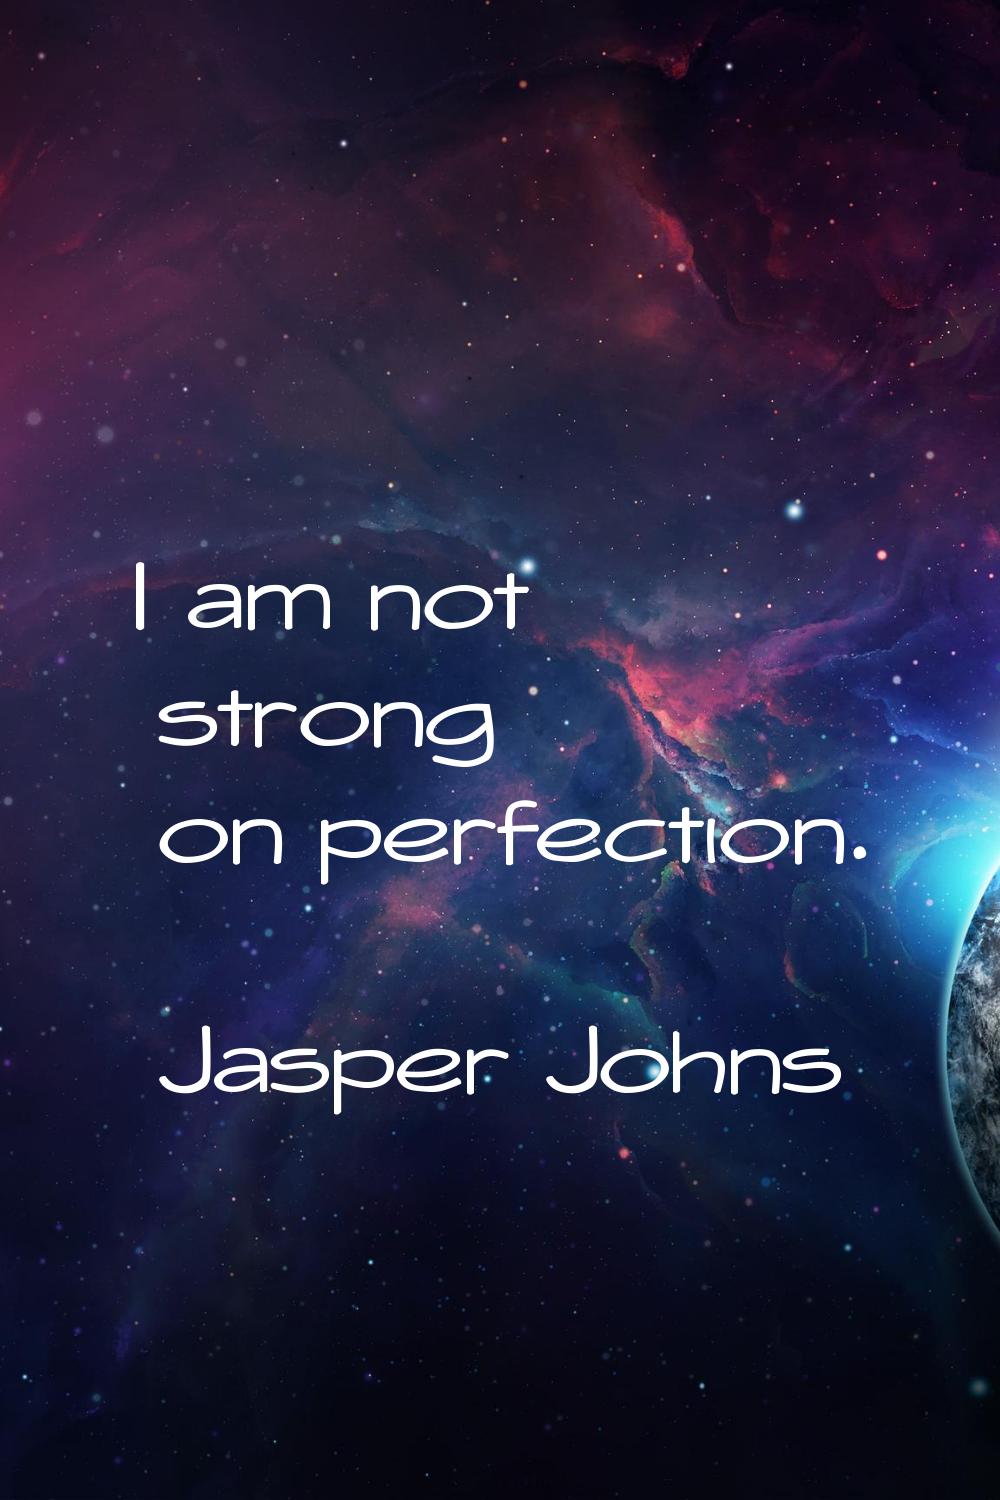 I am not strong on perfection.